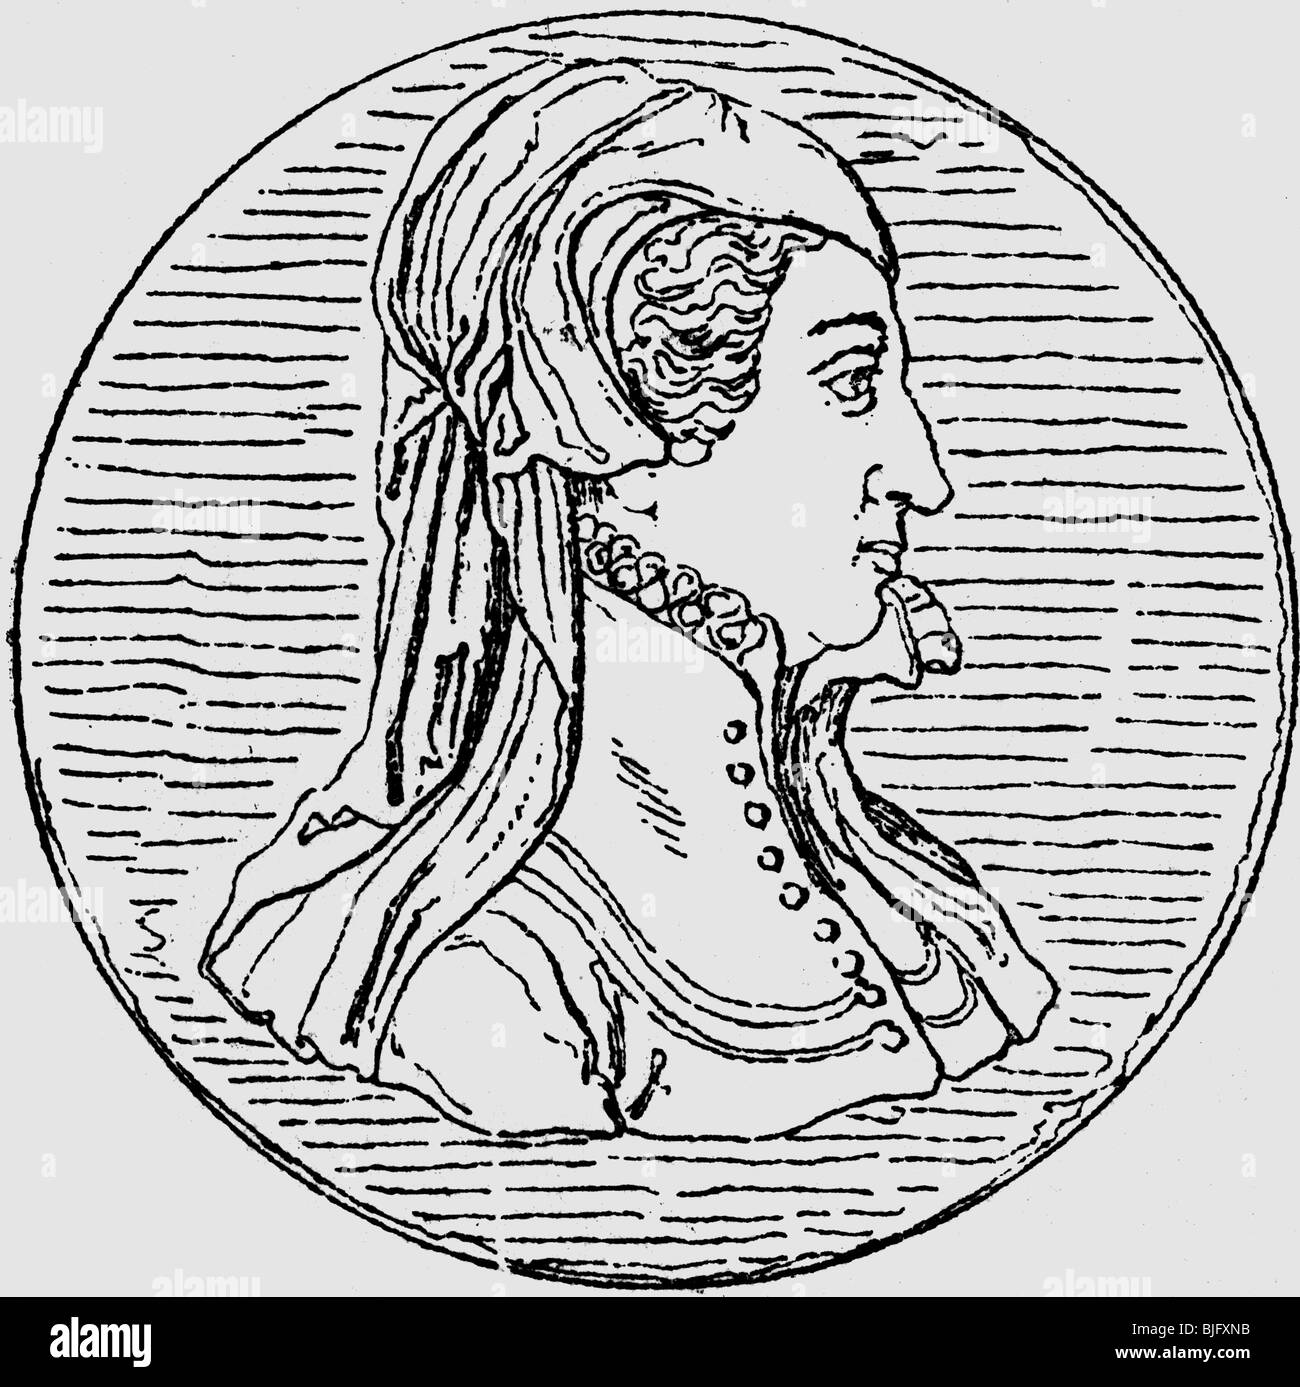 Catherine di Medici, 13.4.1519 - 5.1.1589, Queen Consort of France 31.3.1547 - 10.7.1559, portrait, side view, wood engraving after coin, 19th century, , Stock Photo